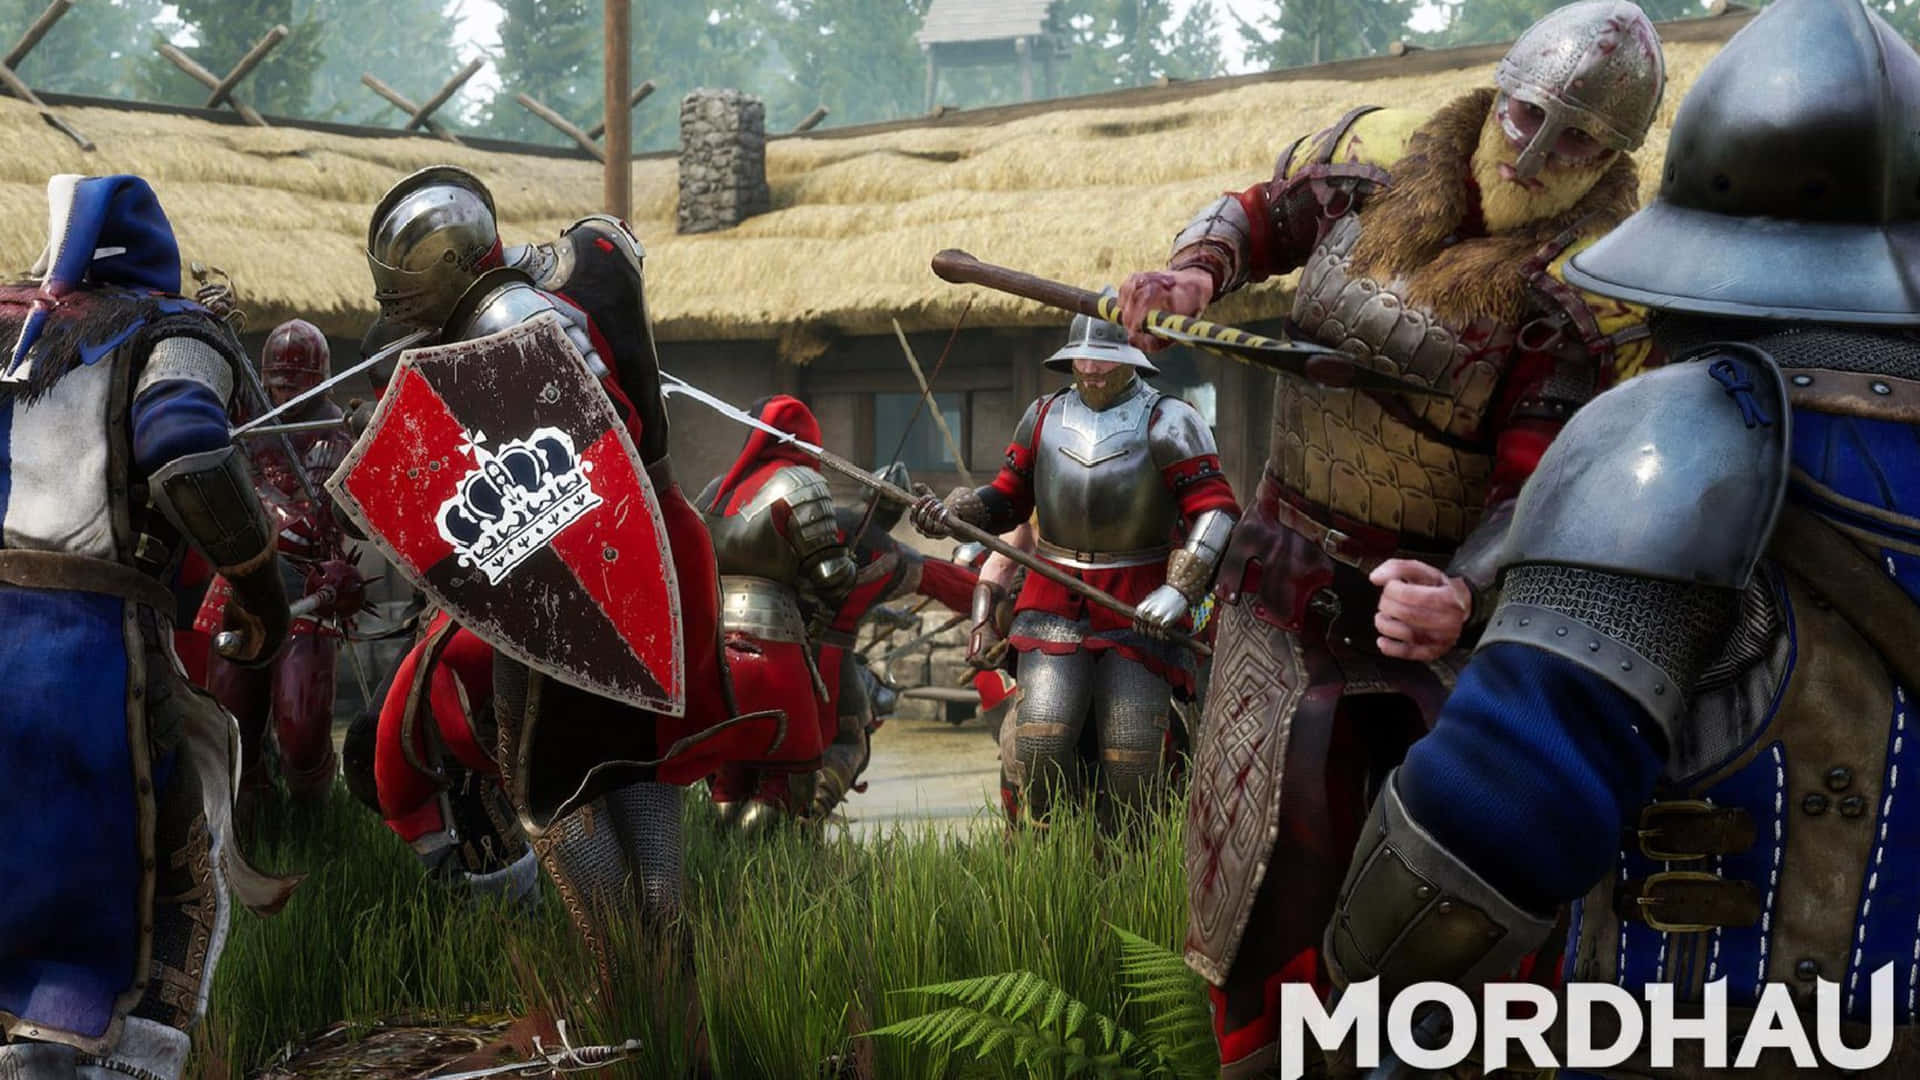 Take your battle to the next level with Mordhau!